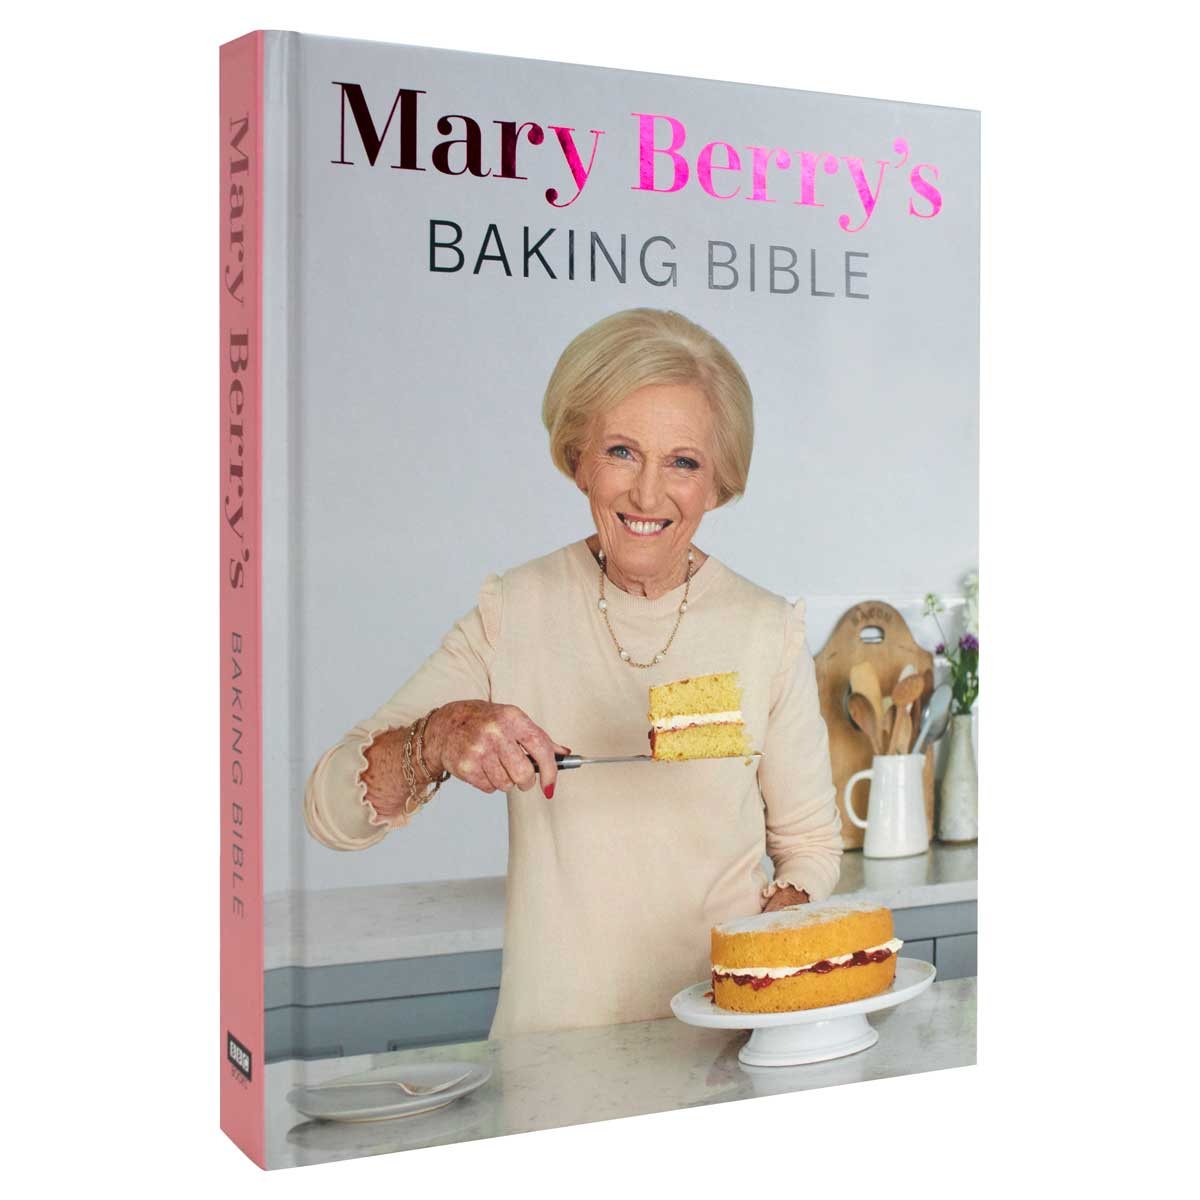 Mary Berry's Baking Bible by Mary Berry | Waterstones